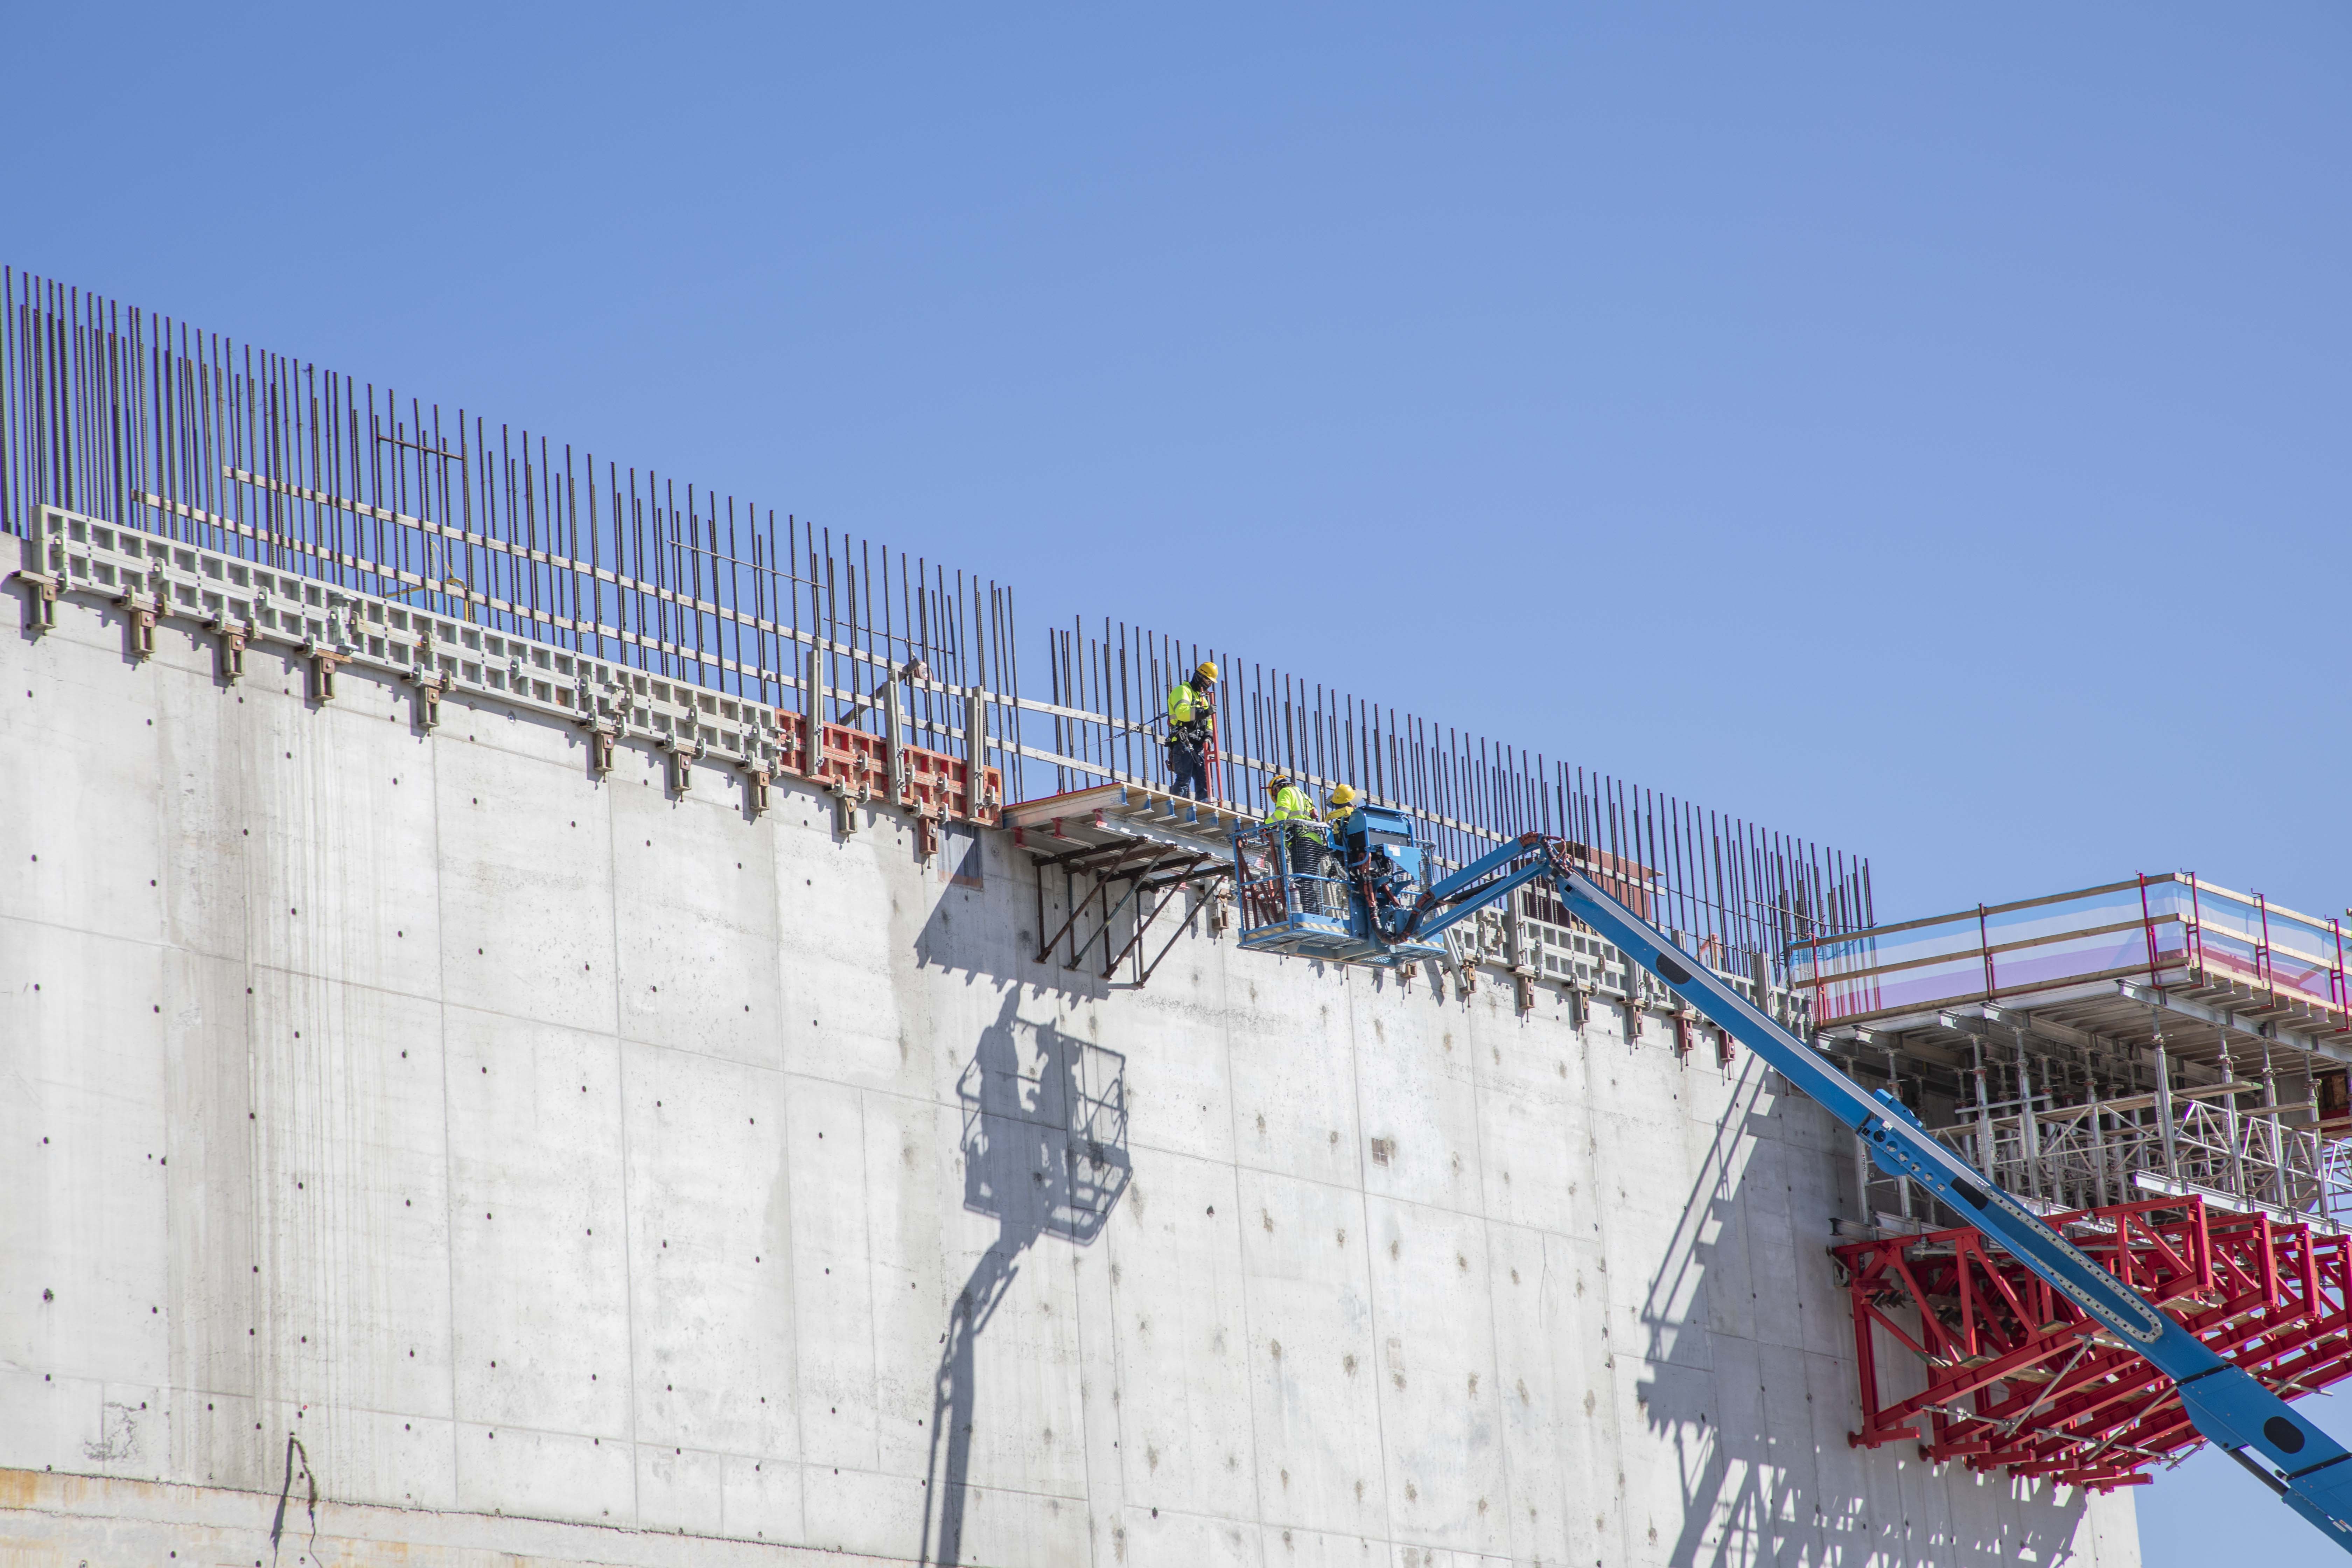 Ironworkers begin installing rebar on the third level of the Main Process Building.